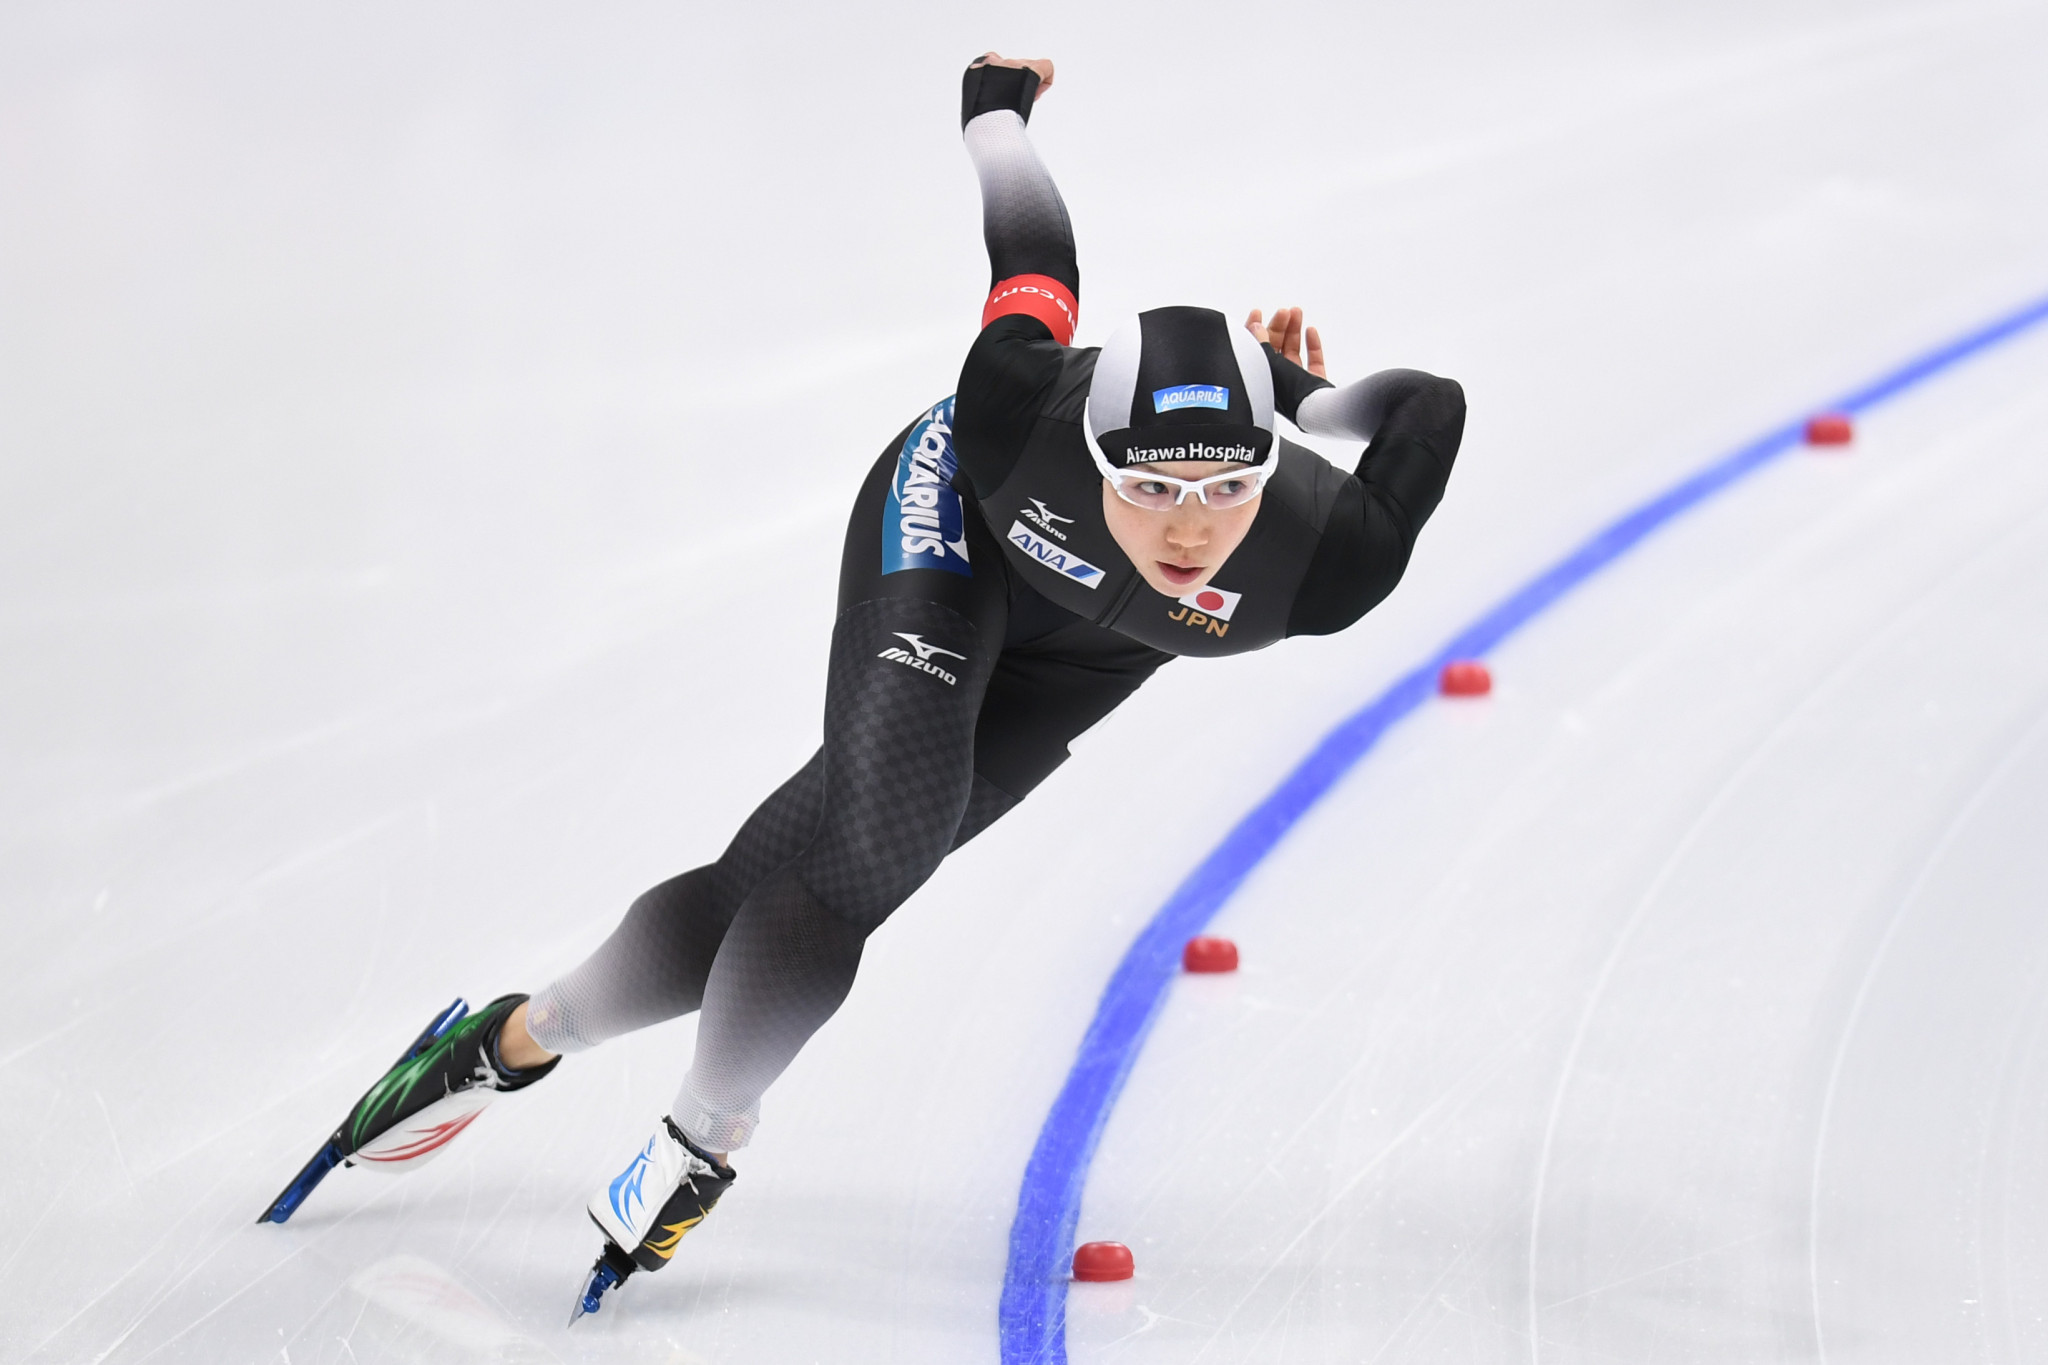 Kodaira secures second gold medal on successful day for Japan at ISU Speed Skating World Cup